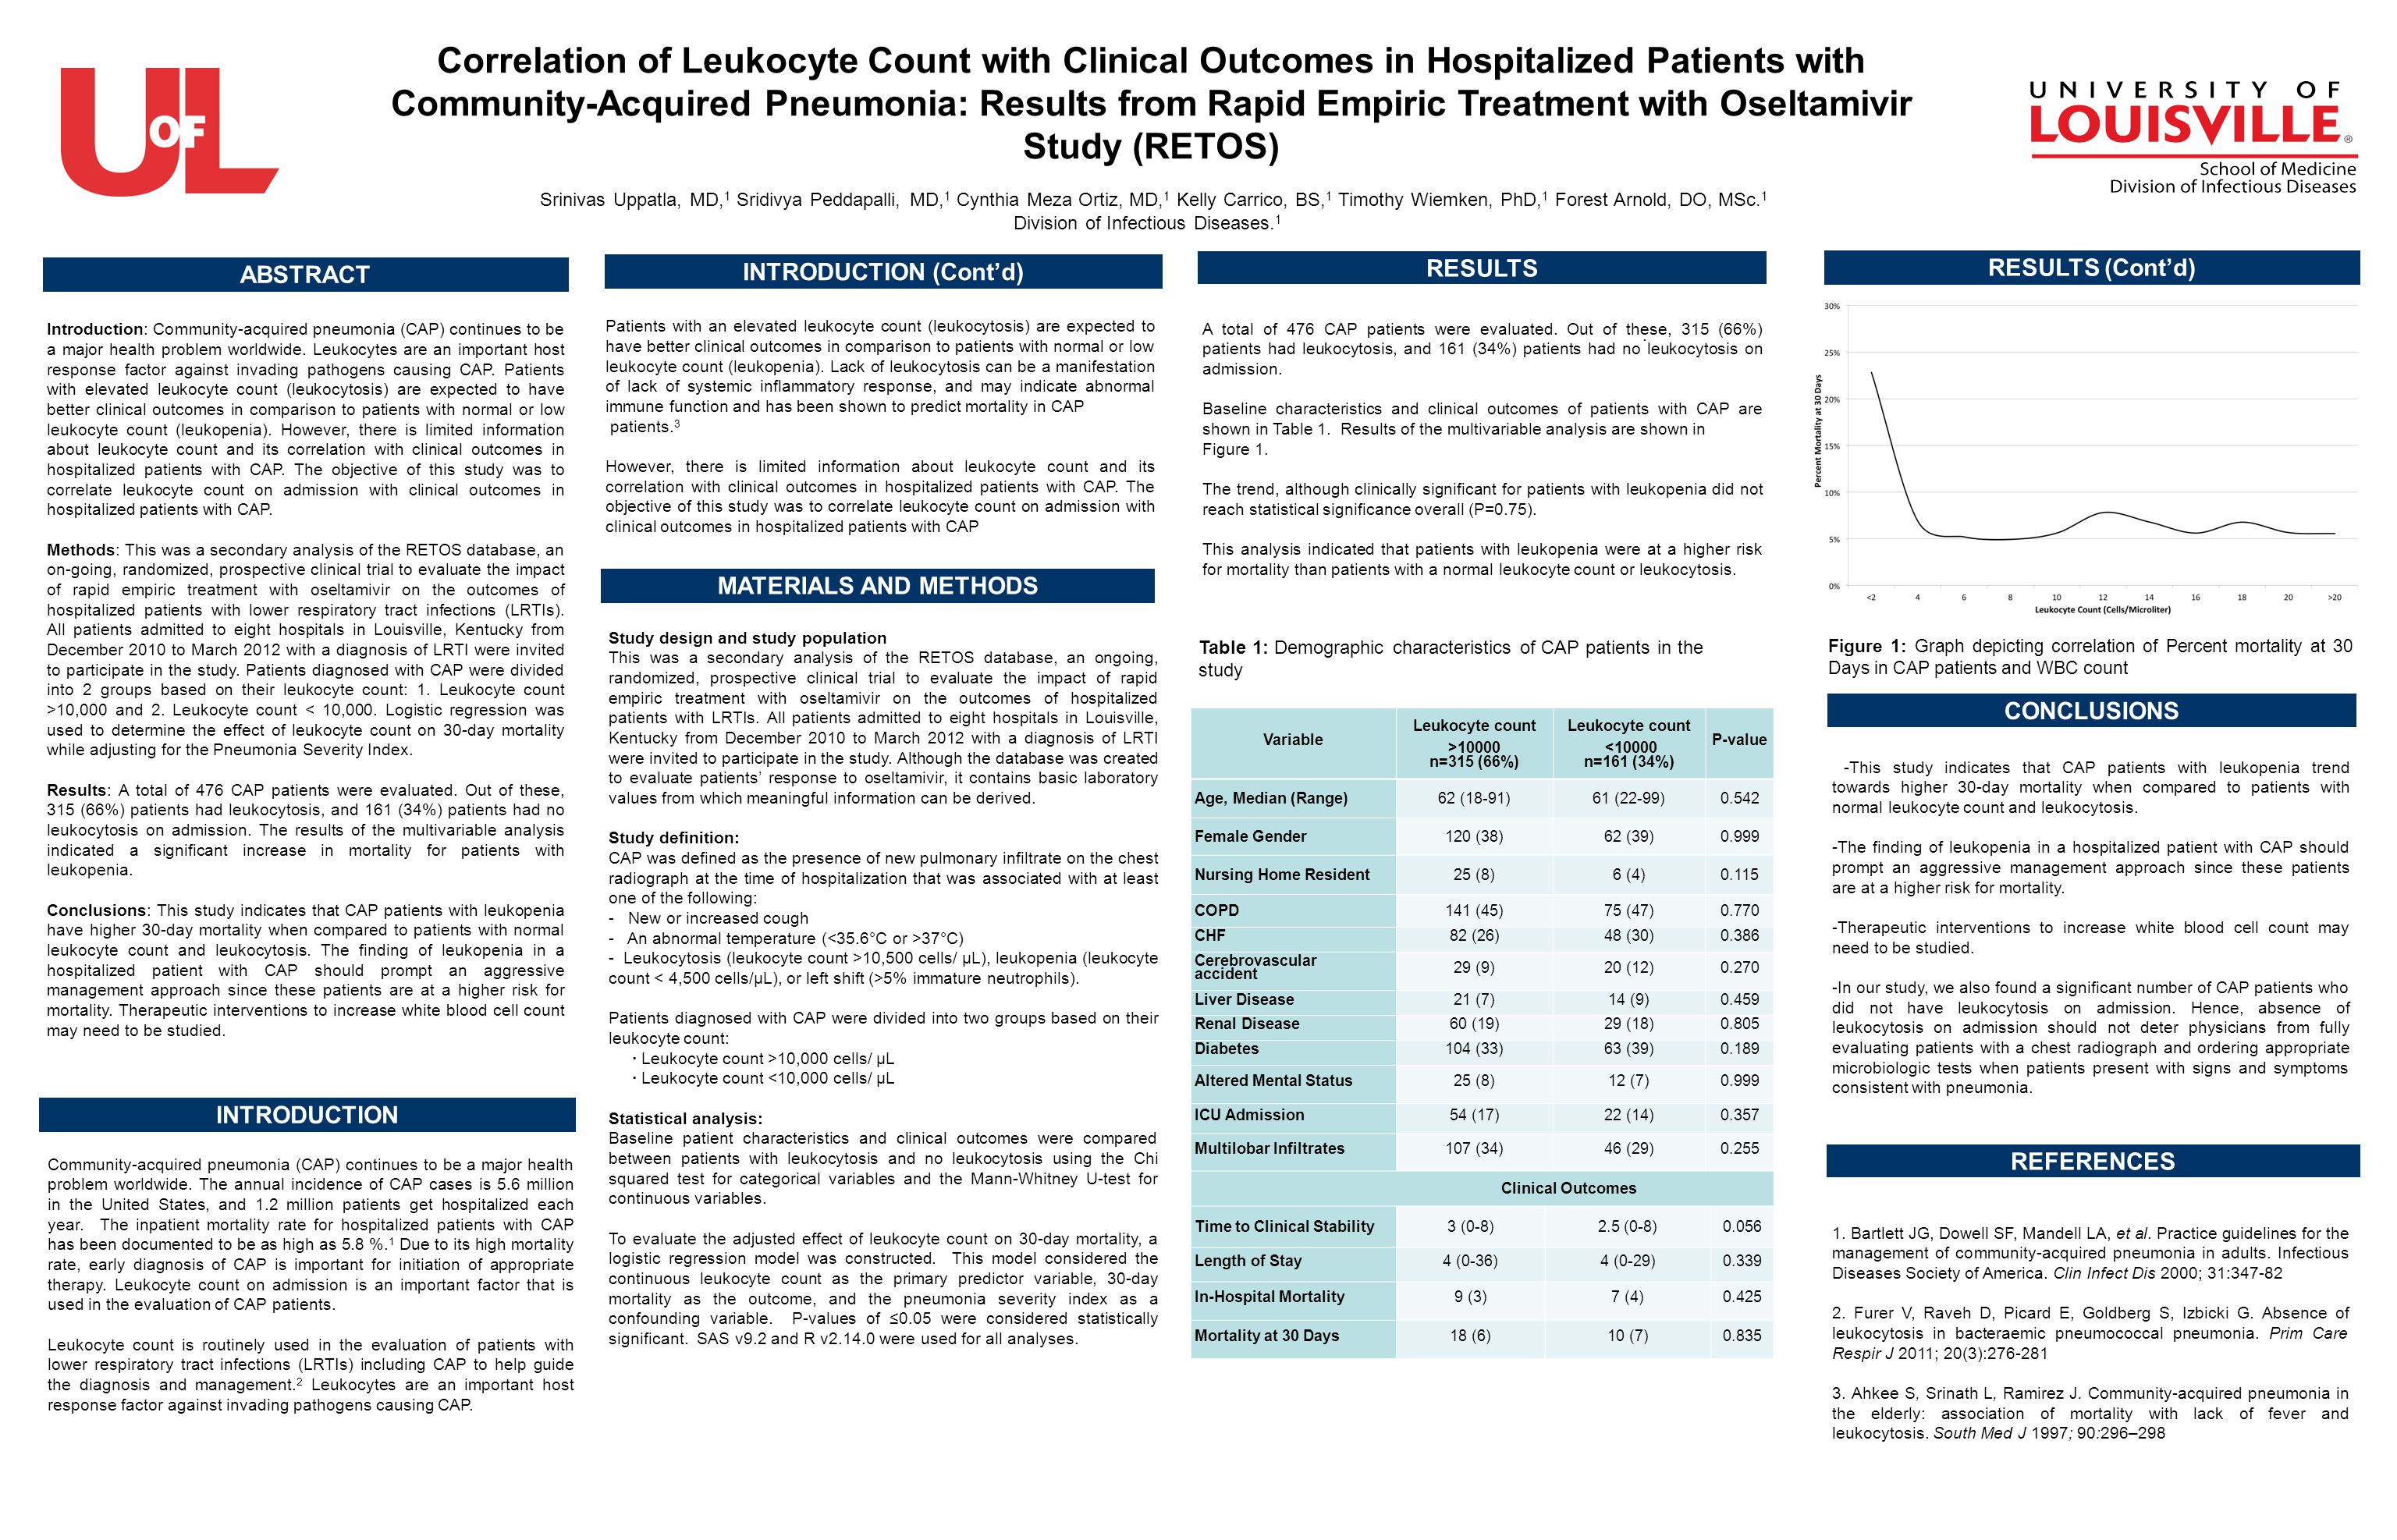 Correlation of Leukocyte Count with Clinical Outcomes in Hospitalized Patients with Community-Acquired Pneumonia: Results from Rapid Empiric Treatment with Oseltamivir Study (RETOS) Srinivas Uppatla, MD, 1 Sridivya Peddapalli, MD, 1 Cynthia Meza Ortiz, MD, 1 Kelly Carrico, BS, 1 Timothy Wiemken, PhD, 1 Forest Arnold, DO, MSc.